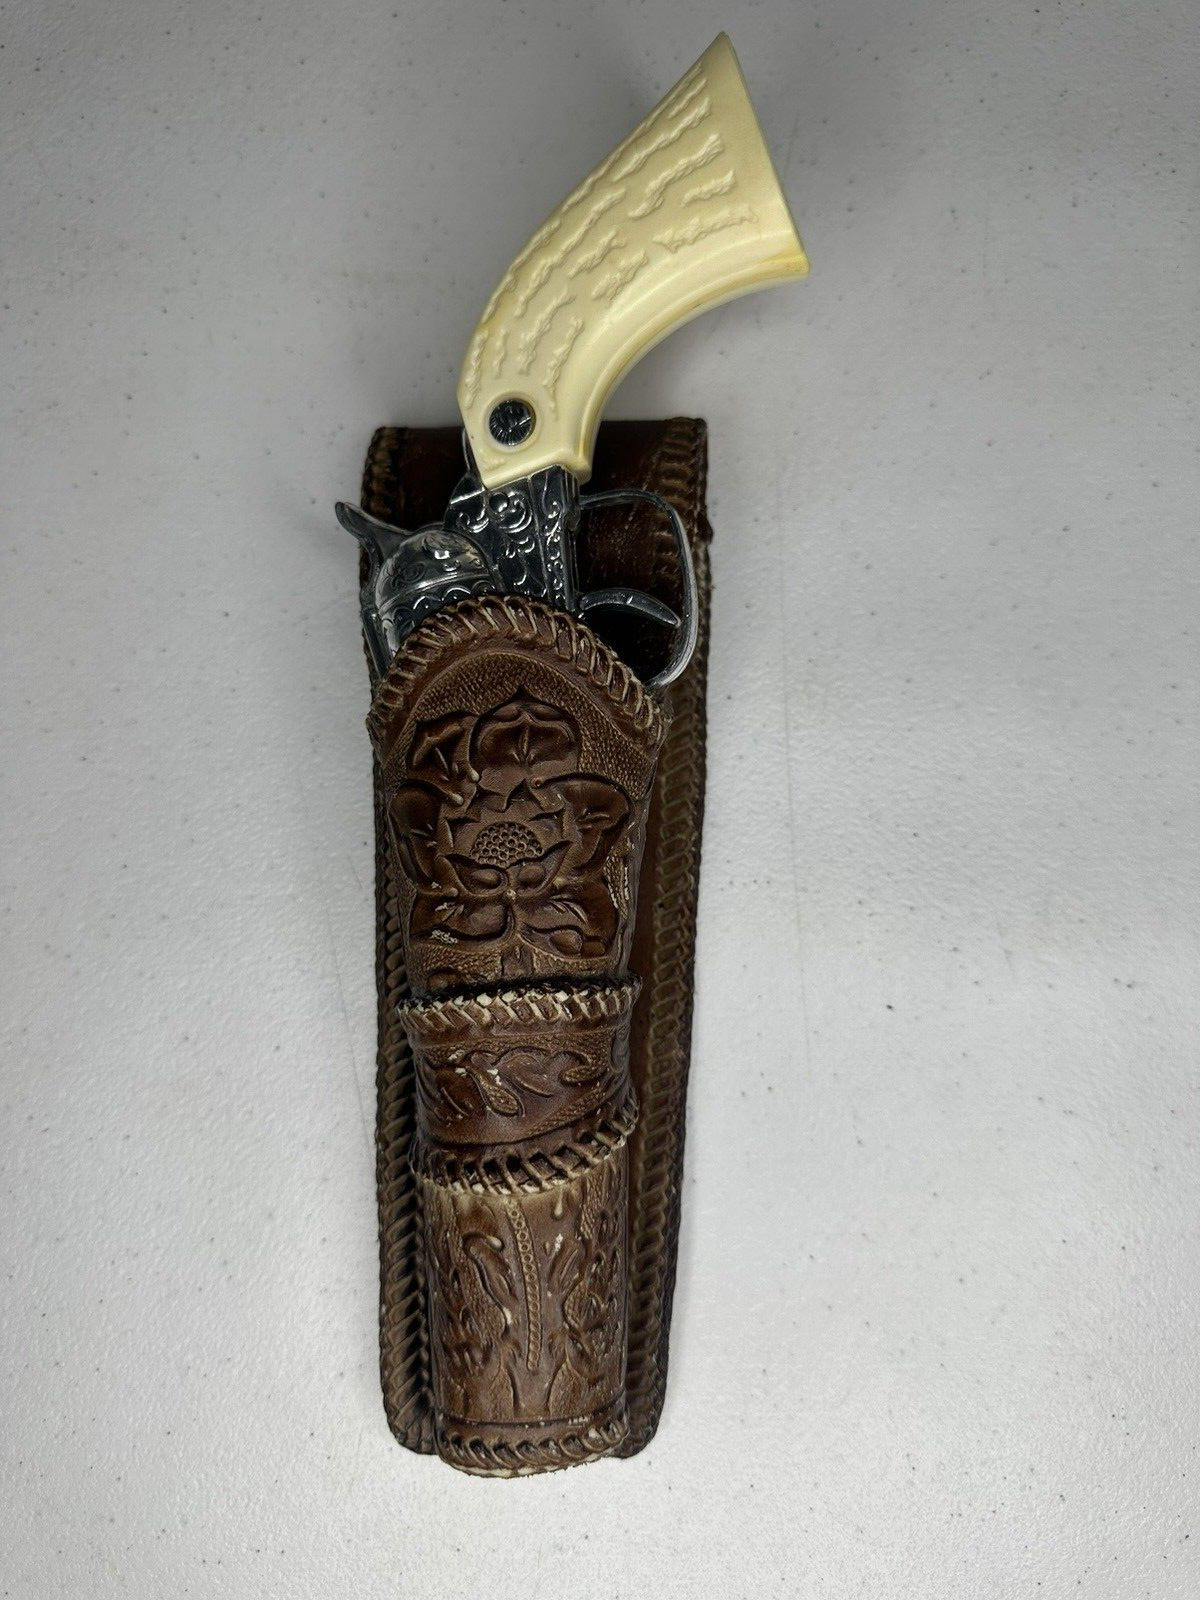 Vintage Kusan Inc. Western Six Shooter Toy Cap Gun #280 with Ornate Leather Holster - TreasuTiques